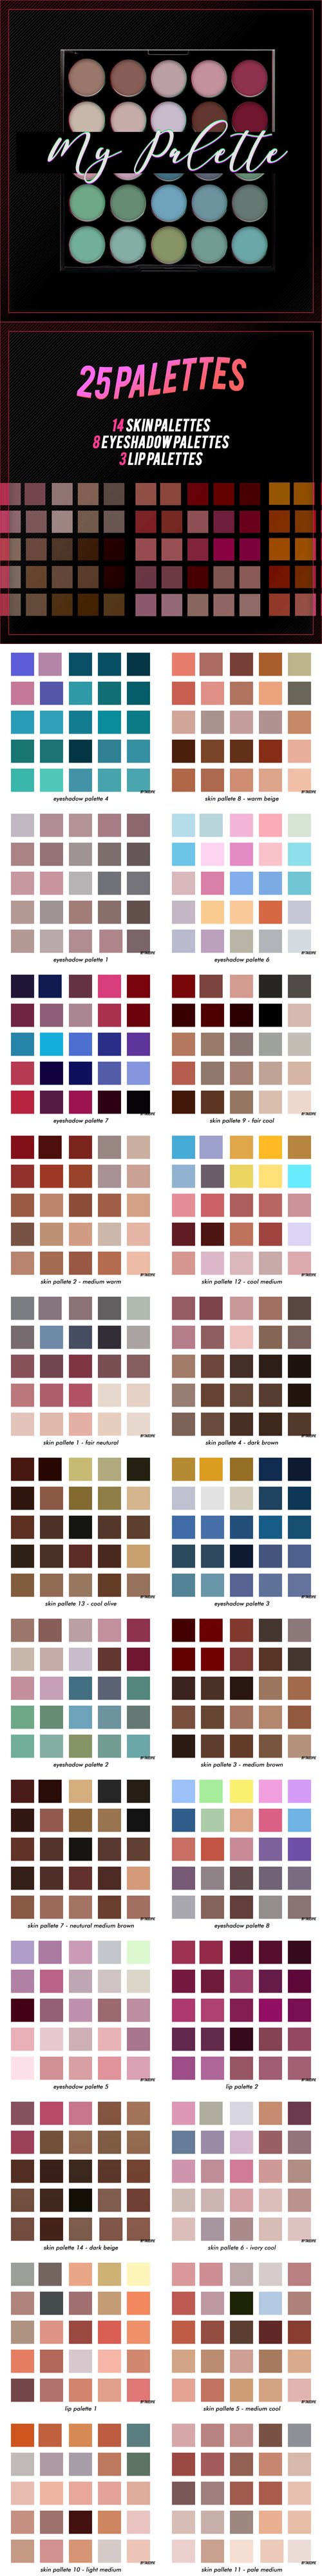 My Pallete - 25 Complete Palletes Pack